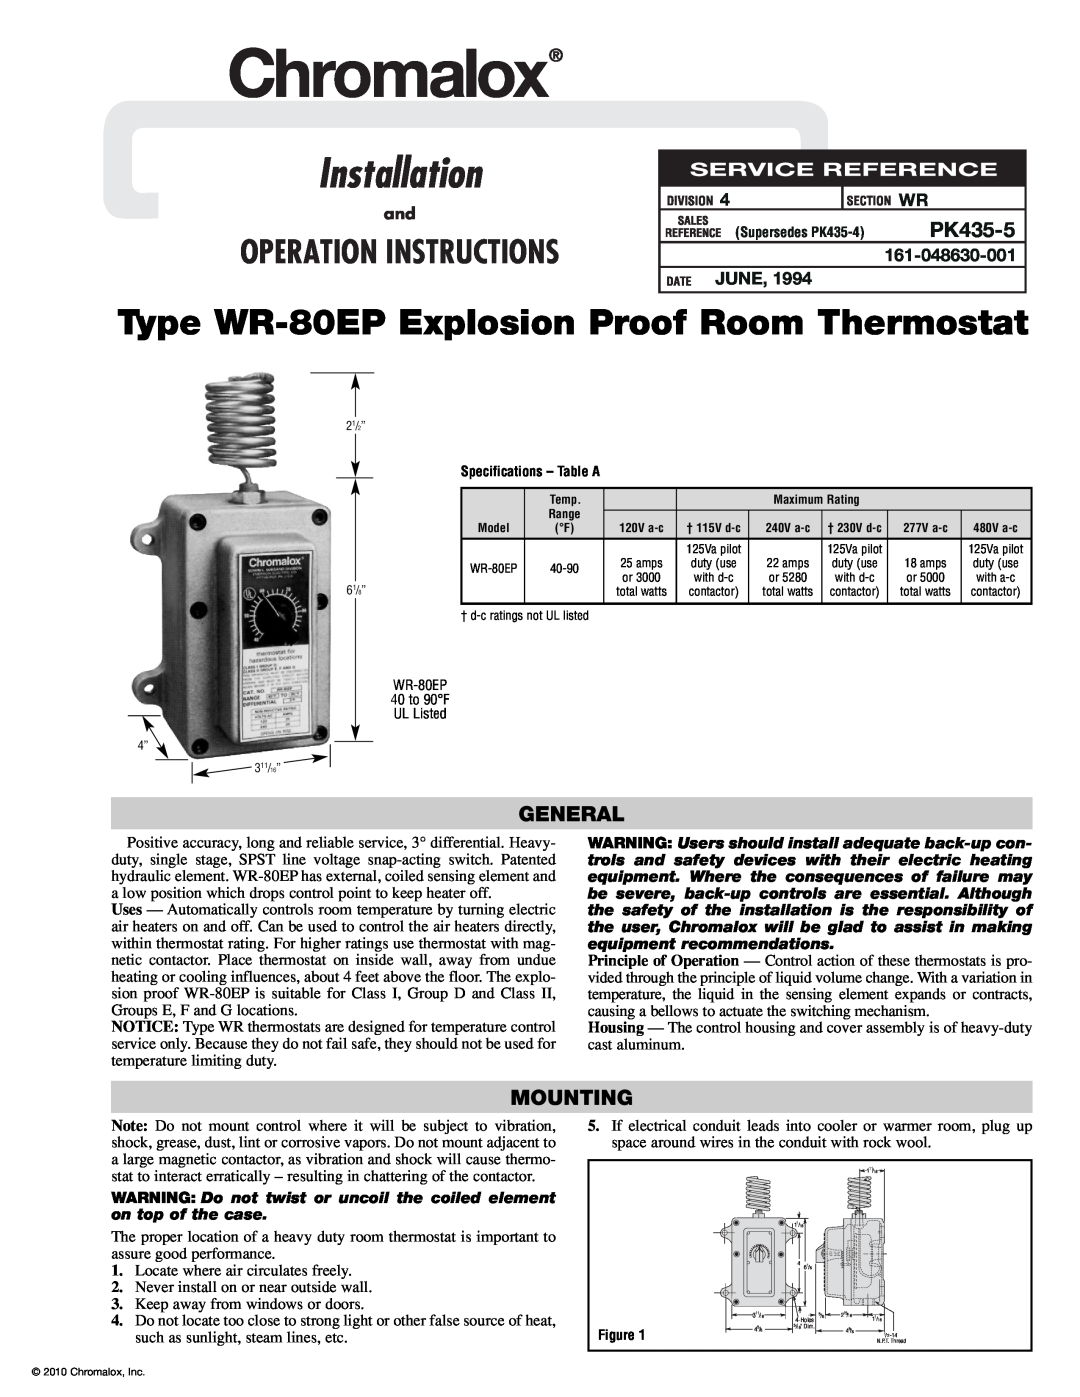 Chromalox specifications PK435-5, General, Mounting, Installation, Type WR-80EP Explosion Proof Room Thermostat, June 